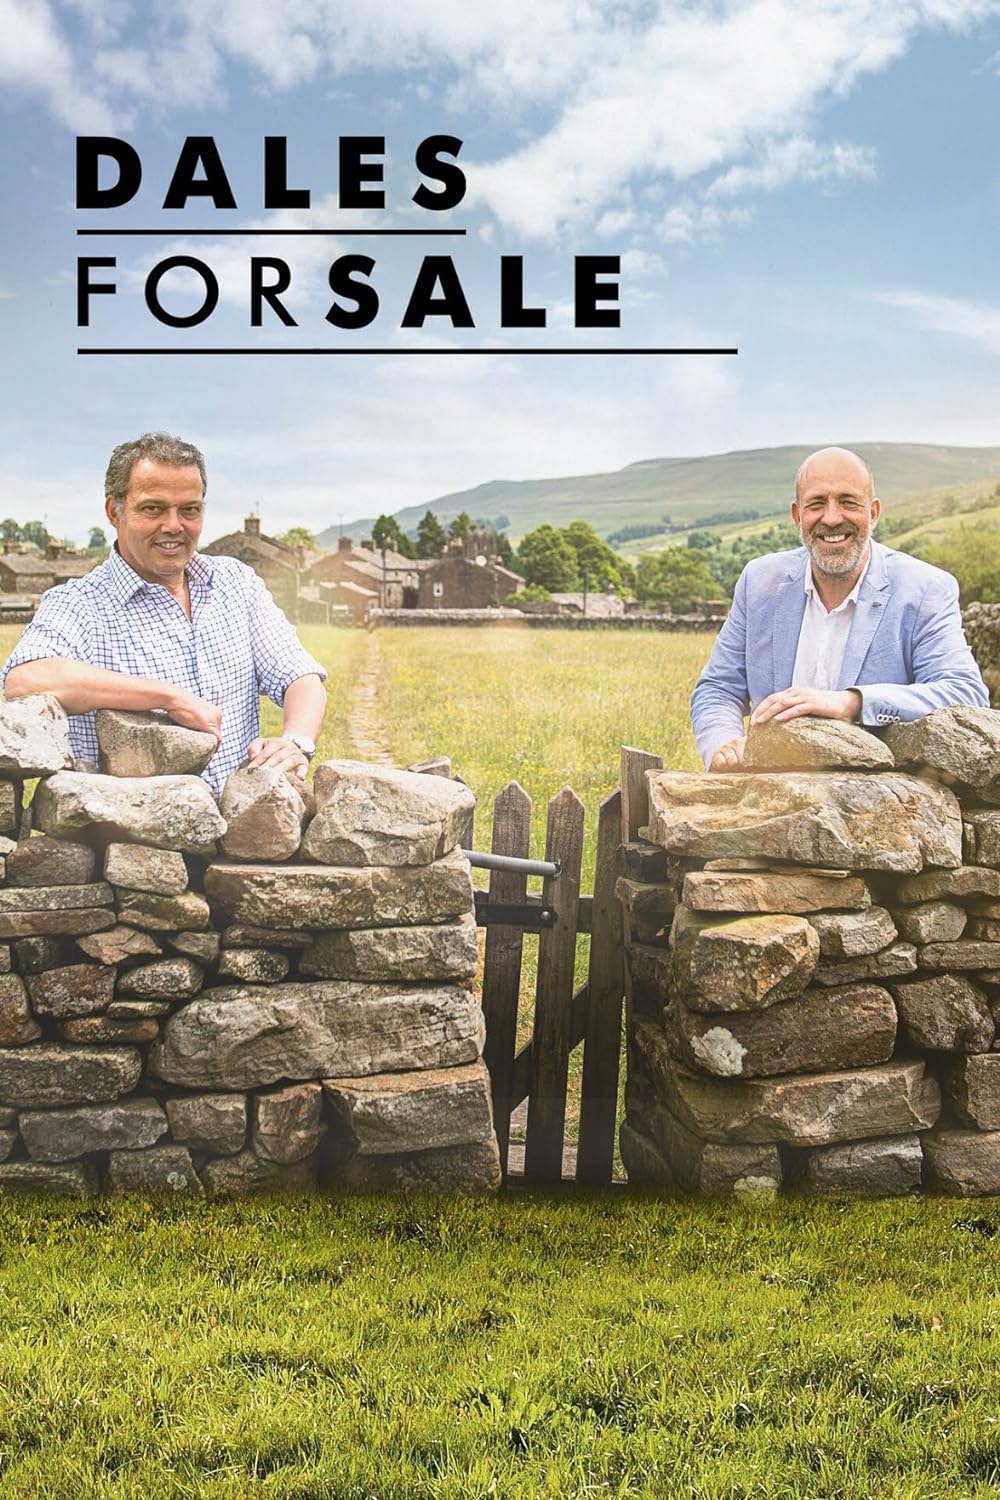 Dales for Sale